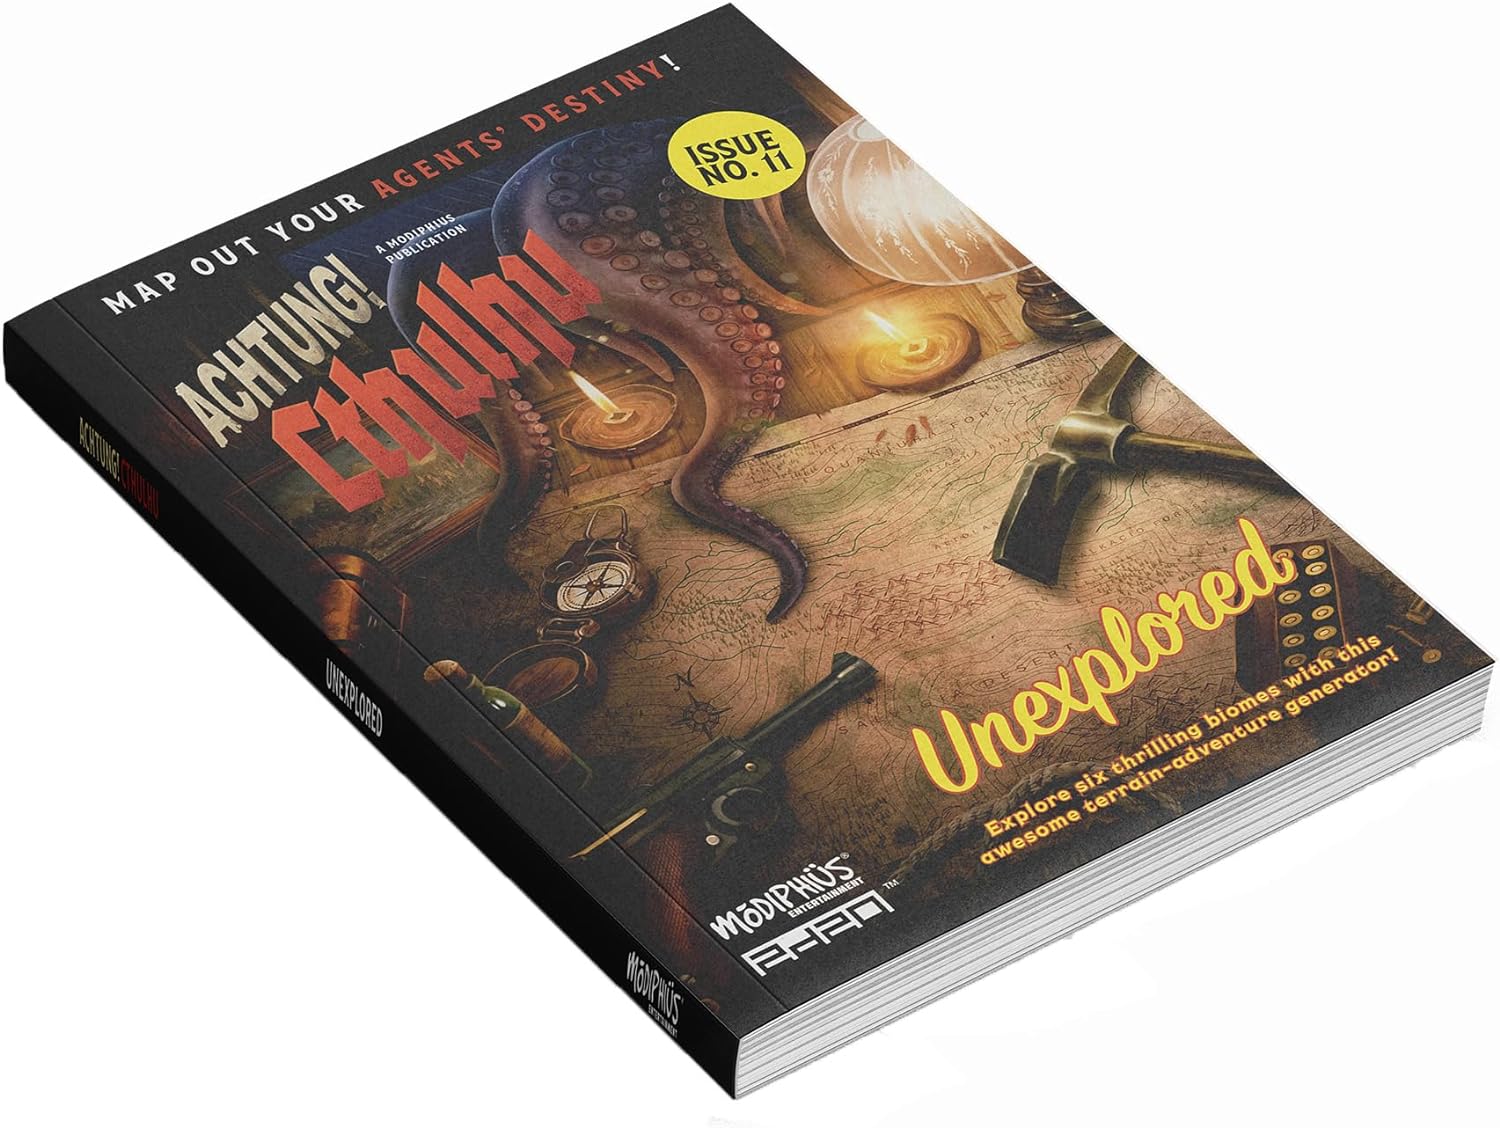 Achtung! Cthulhu: Unexplored - Softcover RPG Book | CCGPrime